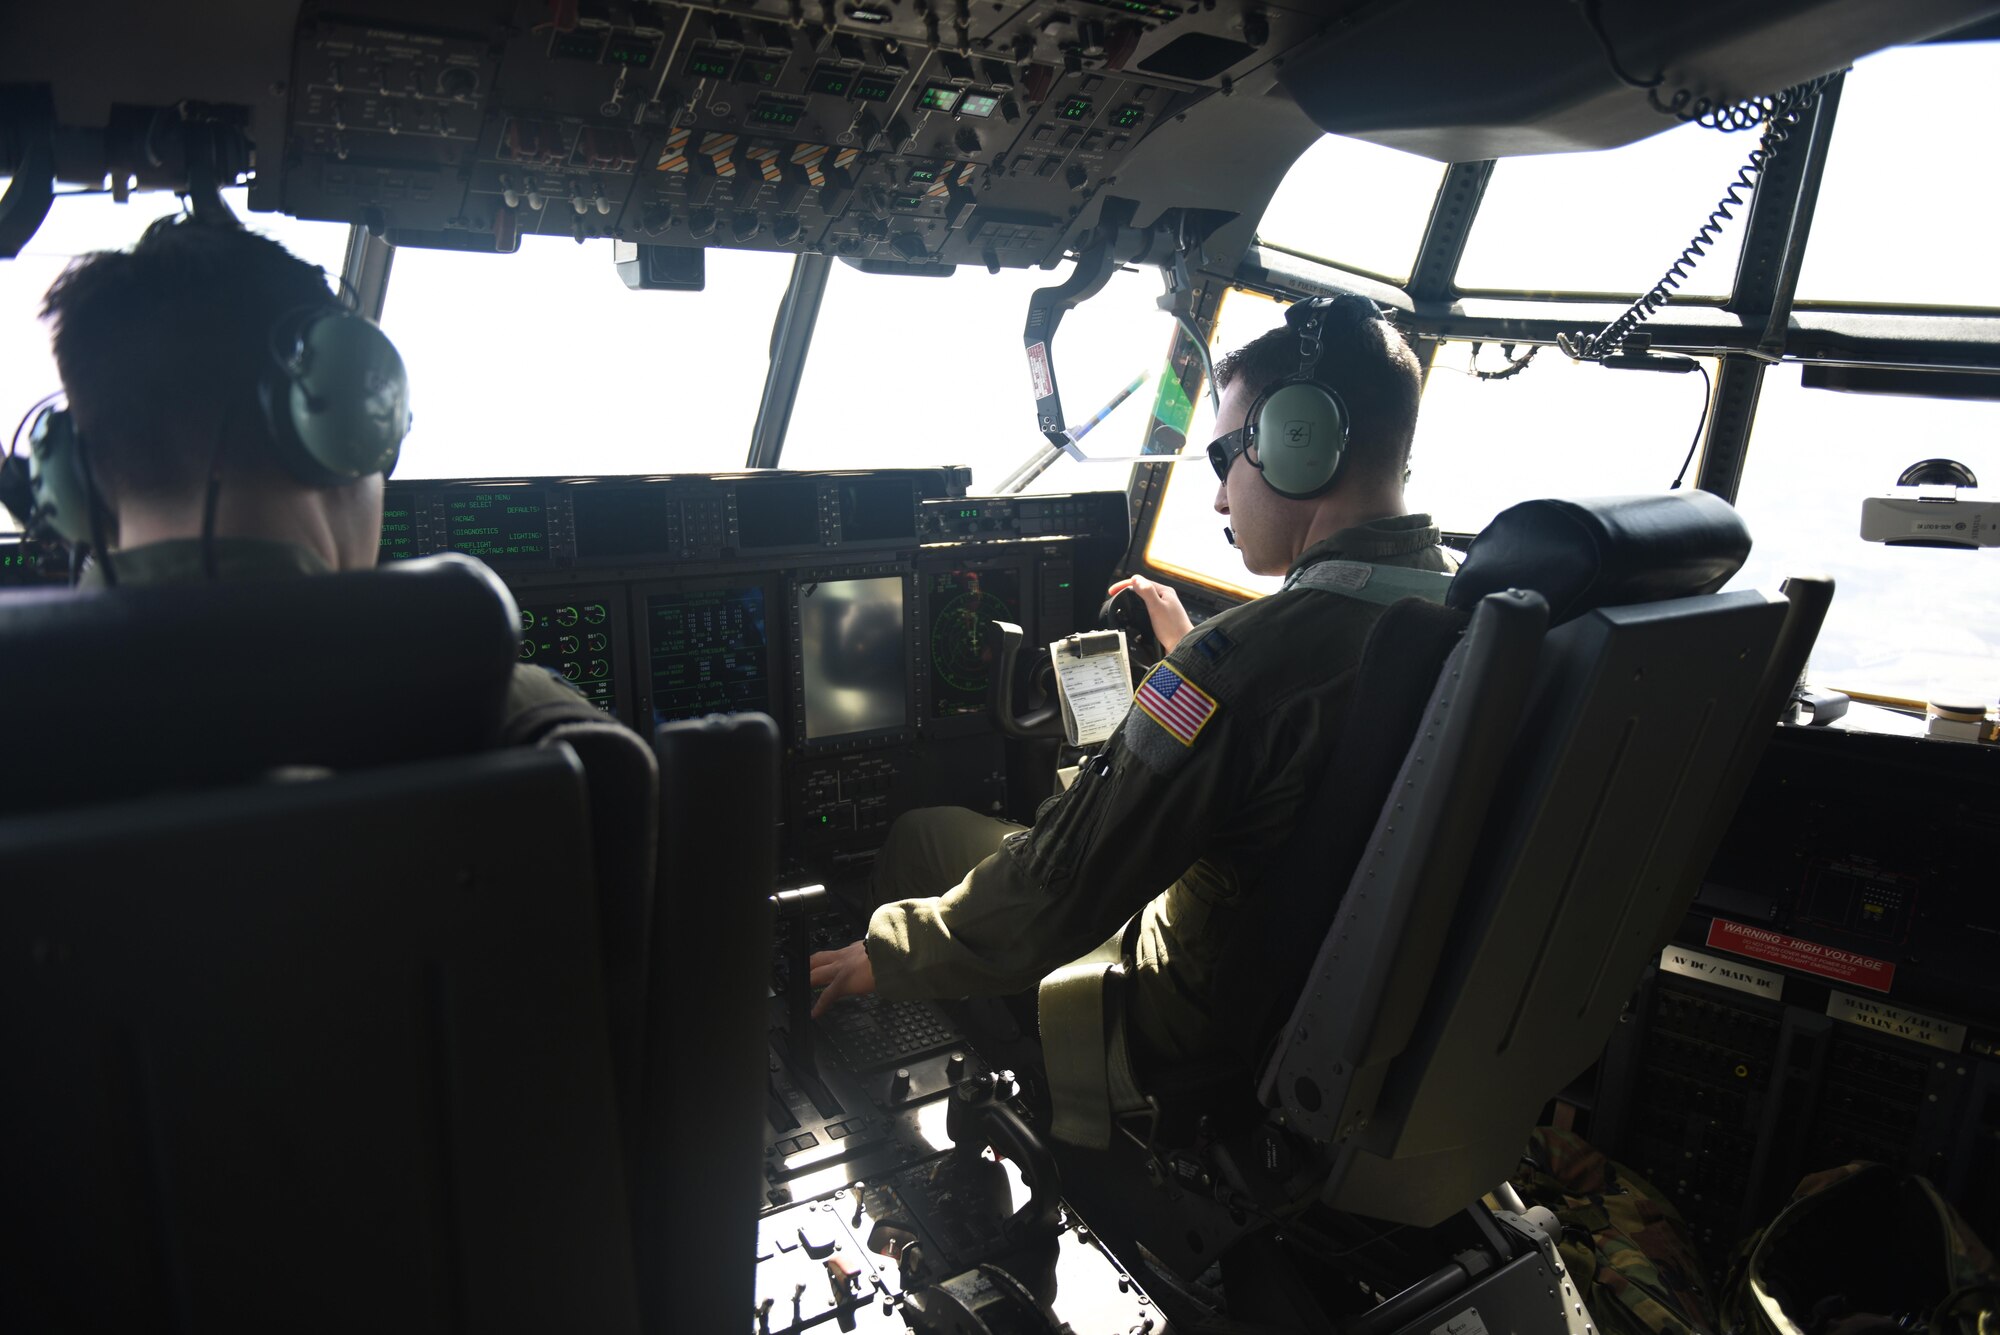 Captain Peter Shoemaker and Capt. Andrew Wentz, pilots with the 193rd Special Operations Wing, Middletown, Pennsylvania, fly an EC-130J aircraft to accomplish required training during the incentive flight conducted April 9, 2017. The incentive flights are a way to highlight outstanding Airmens’ accomplishments as well as provide mission required training for the aircrew. (U.S. Air National Guard photo by Senior Airman Julia Sorber/Released)